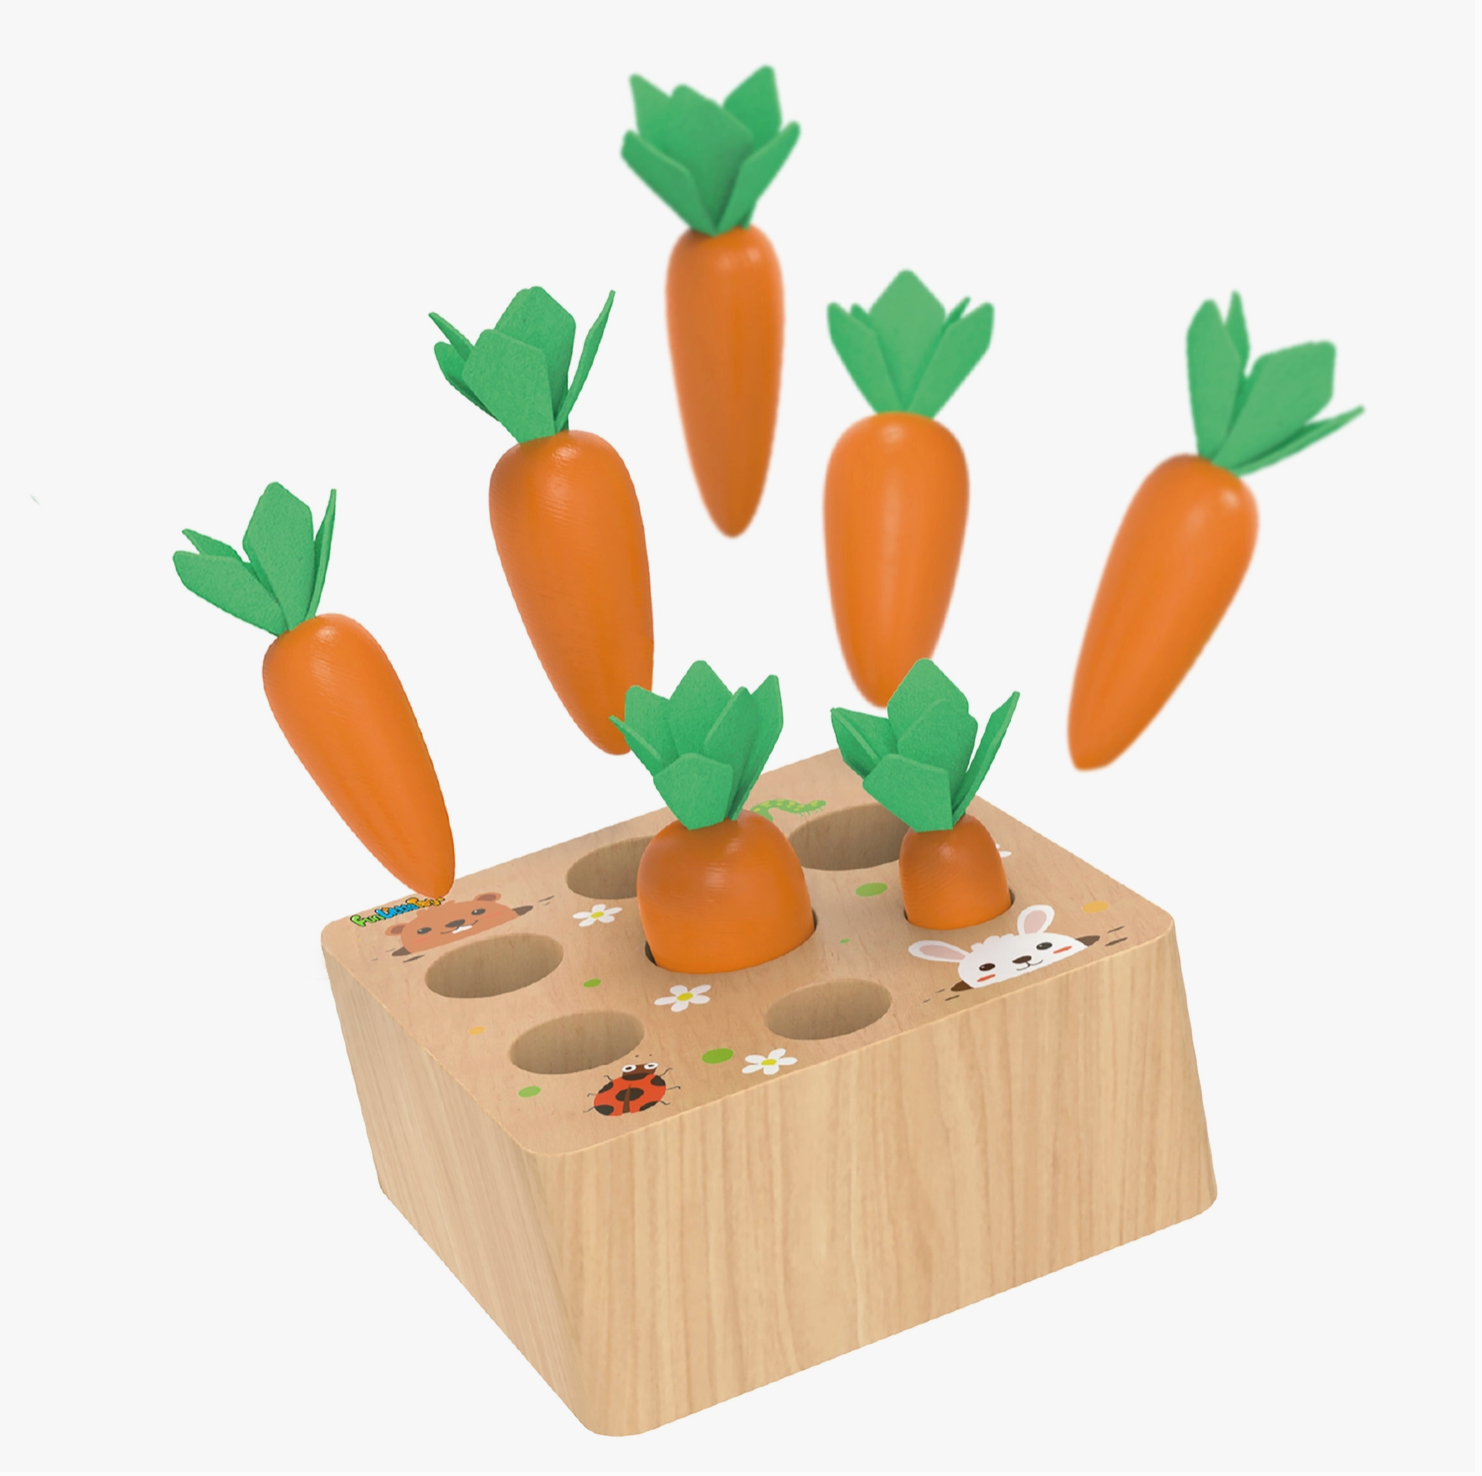 [title]Wooden Toy Carrot Size Sorter